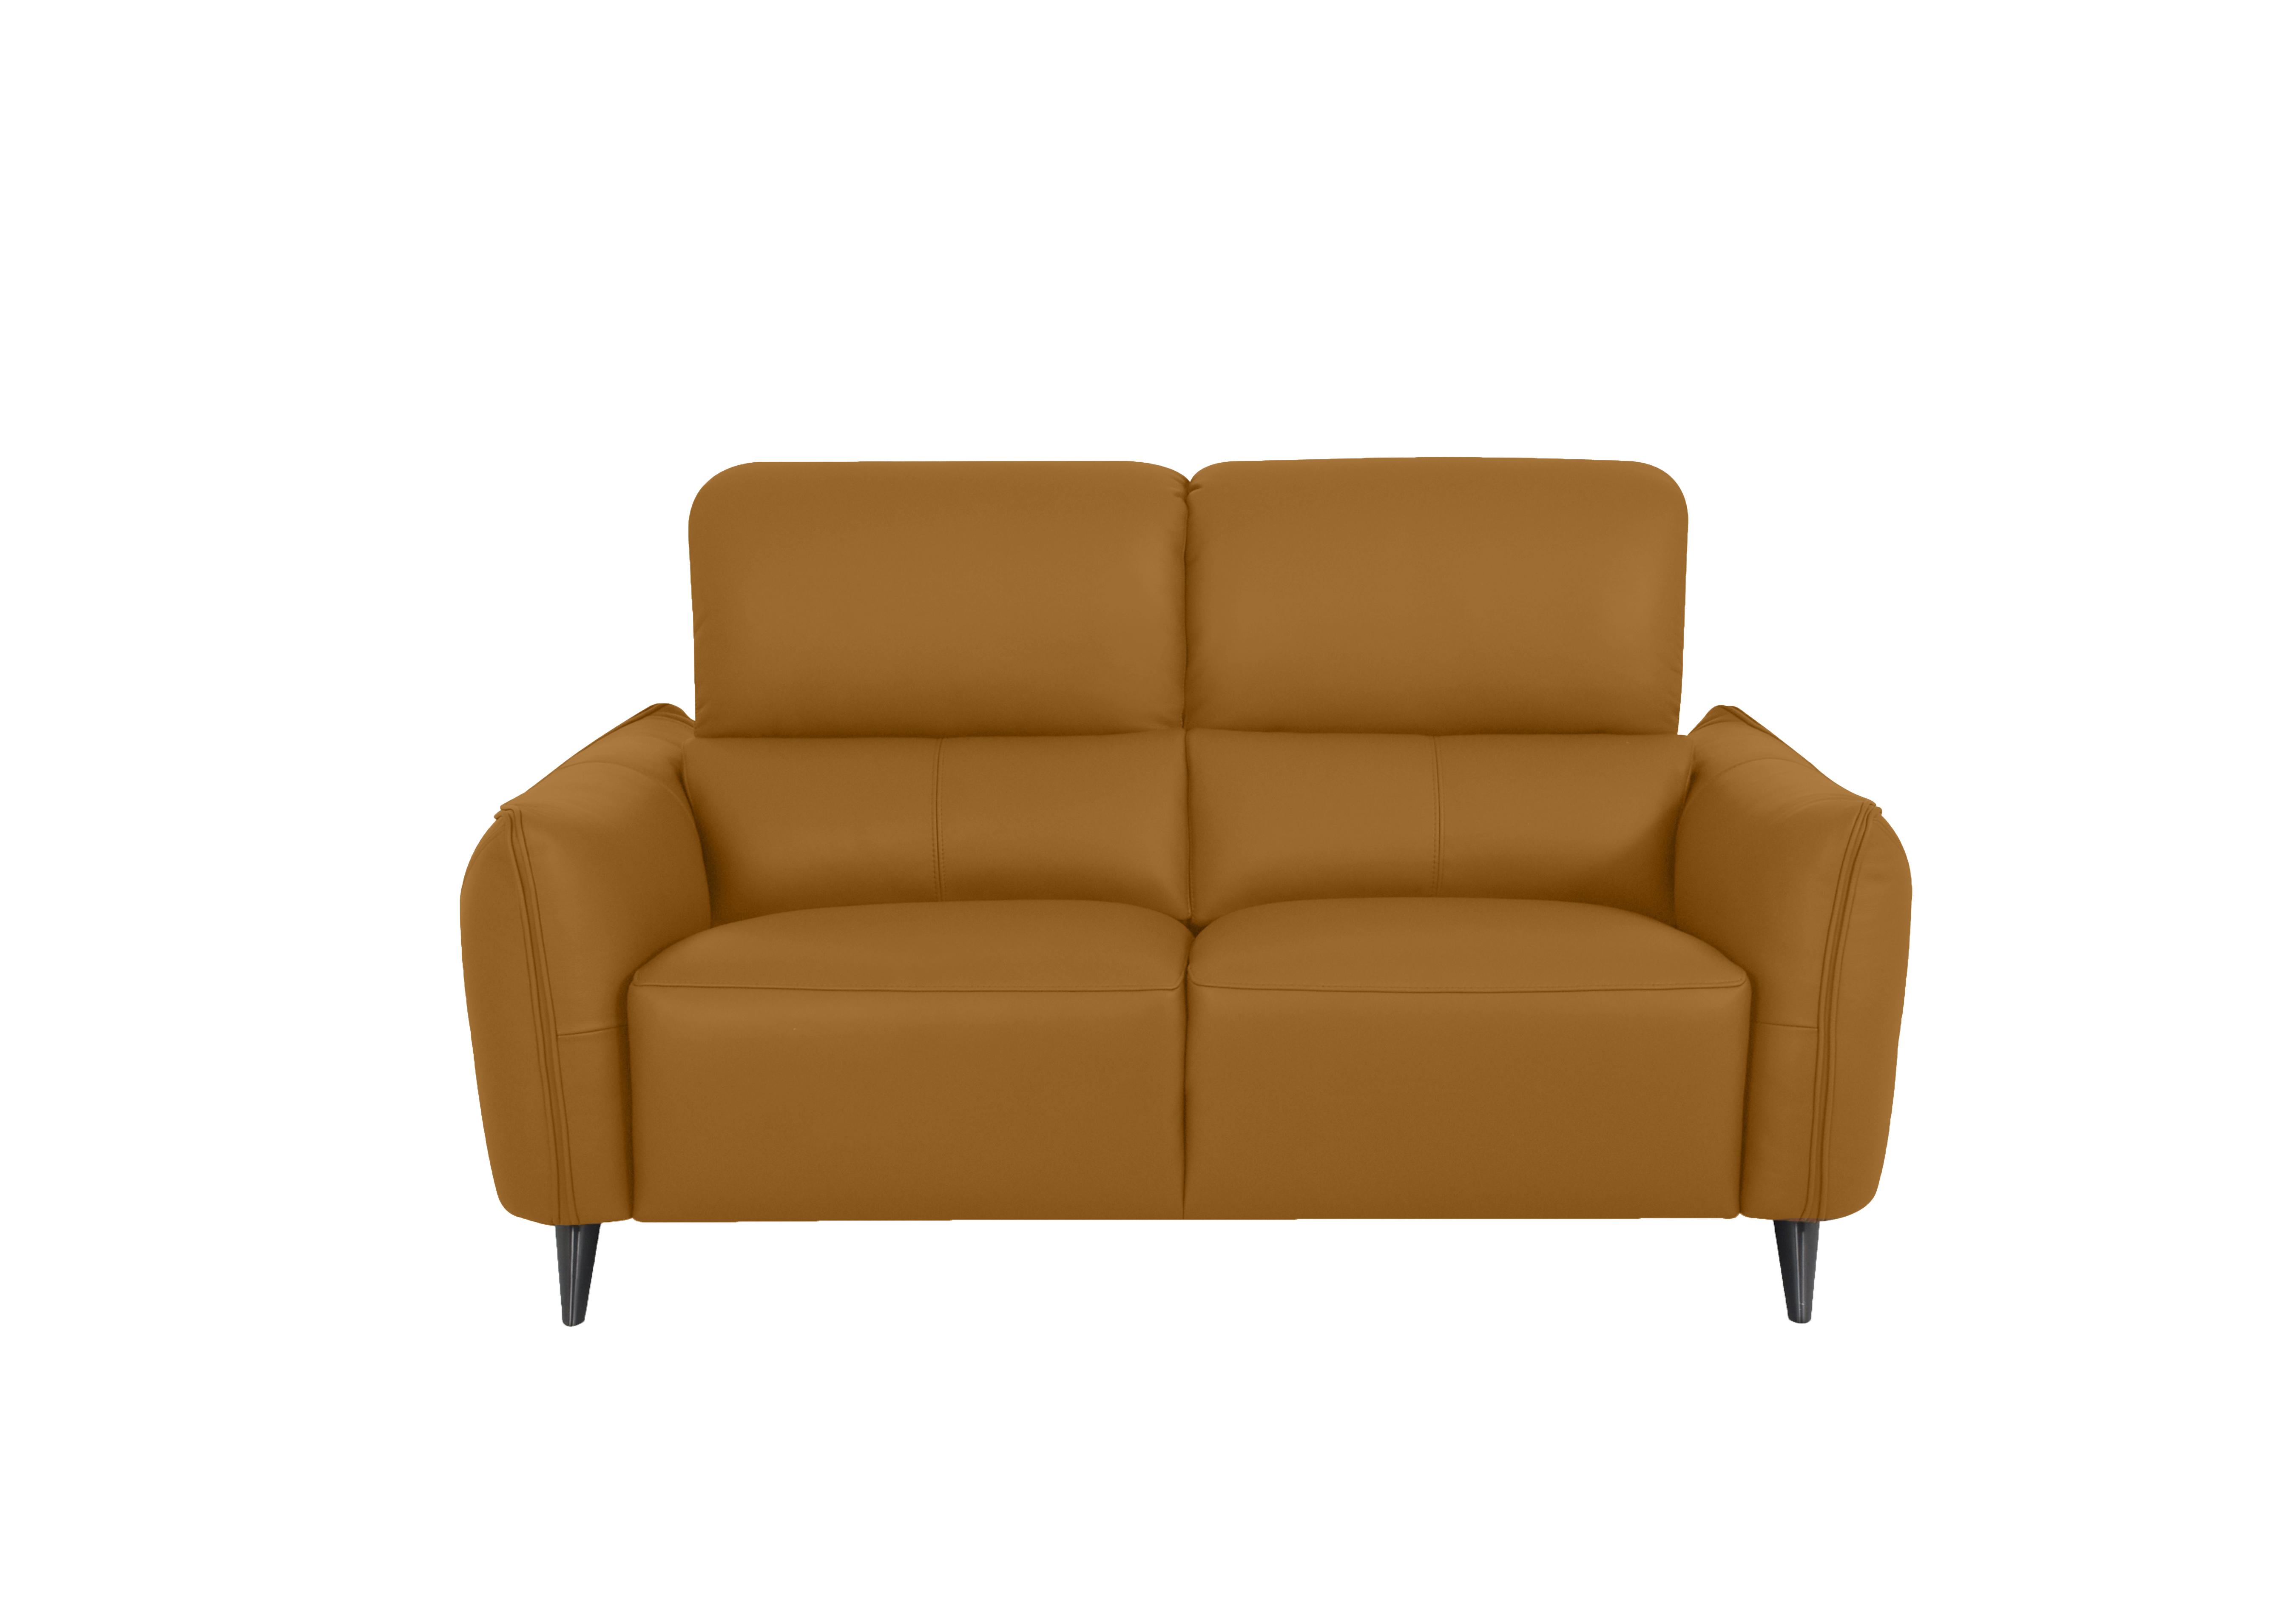 Maddox 2.5 Seater Leather Sofa in Np-606e Honey Yellow on Furniture Village